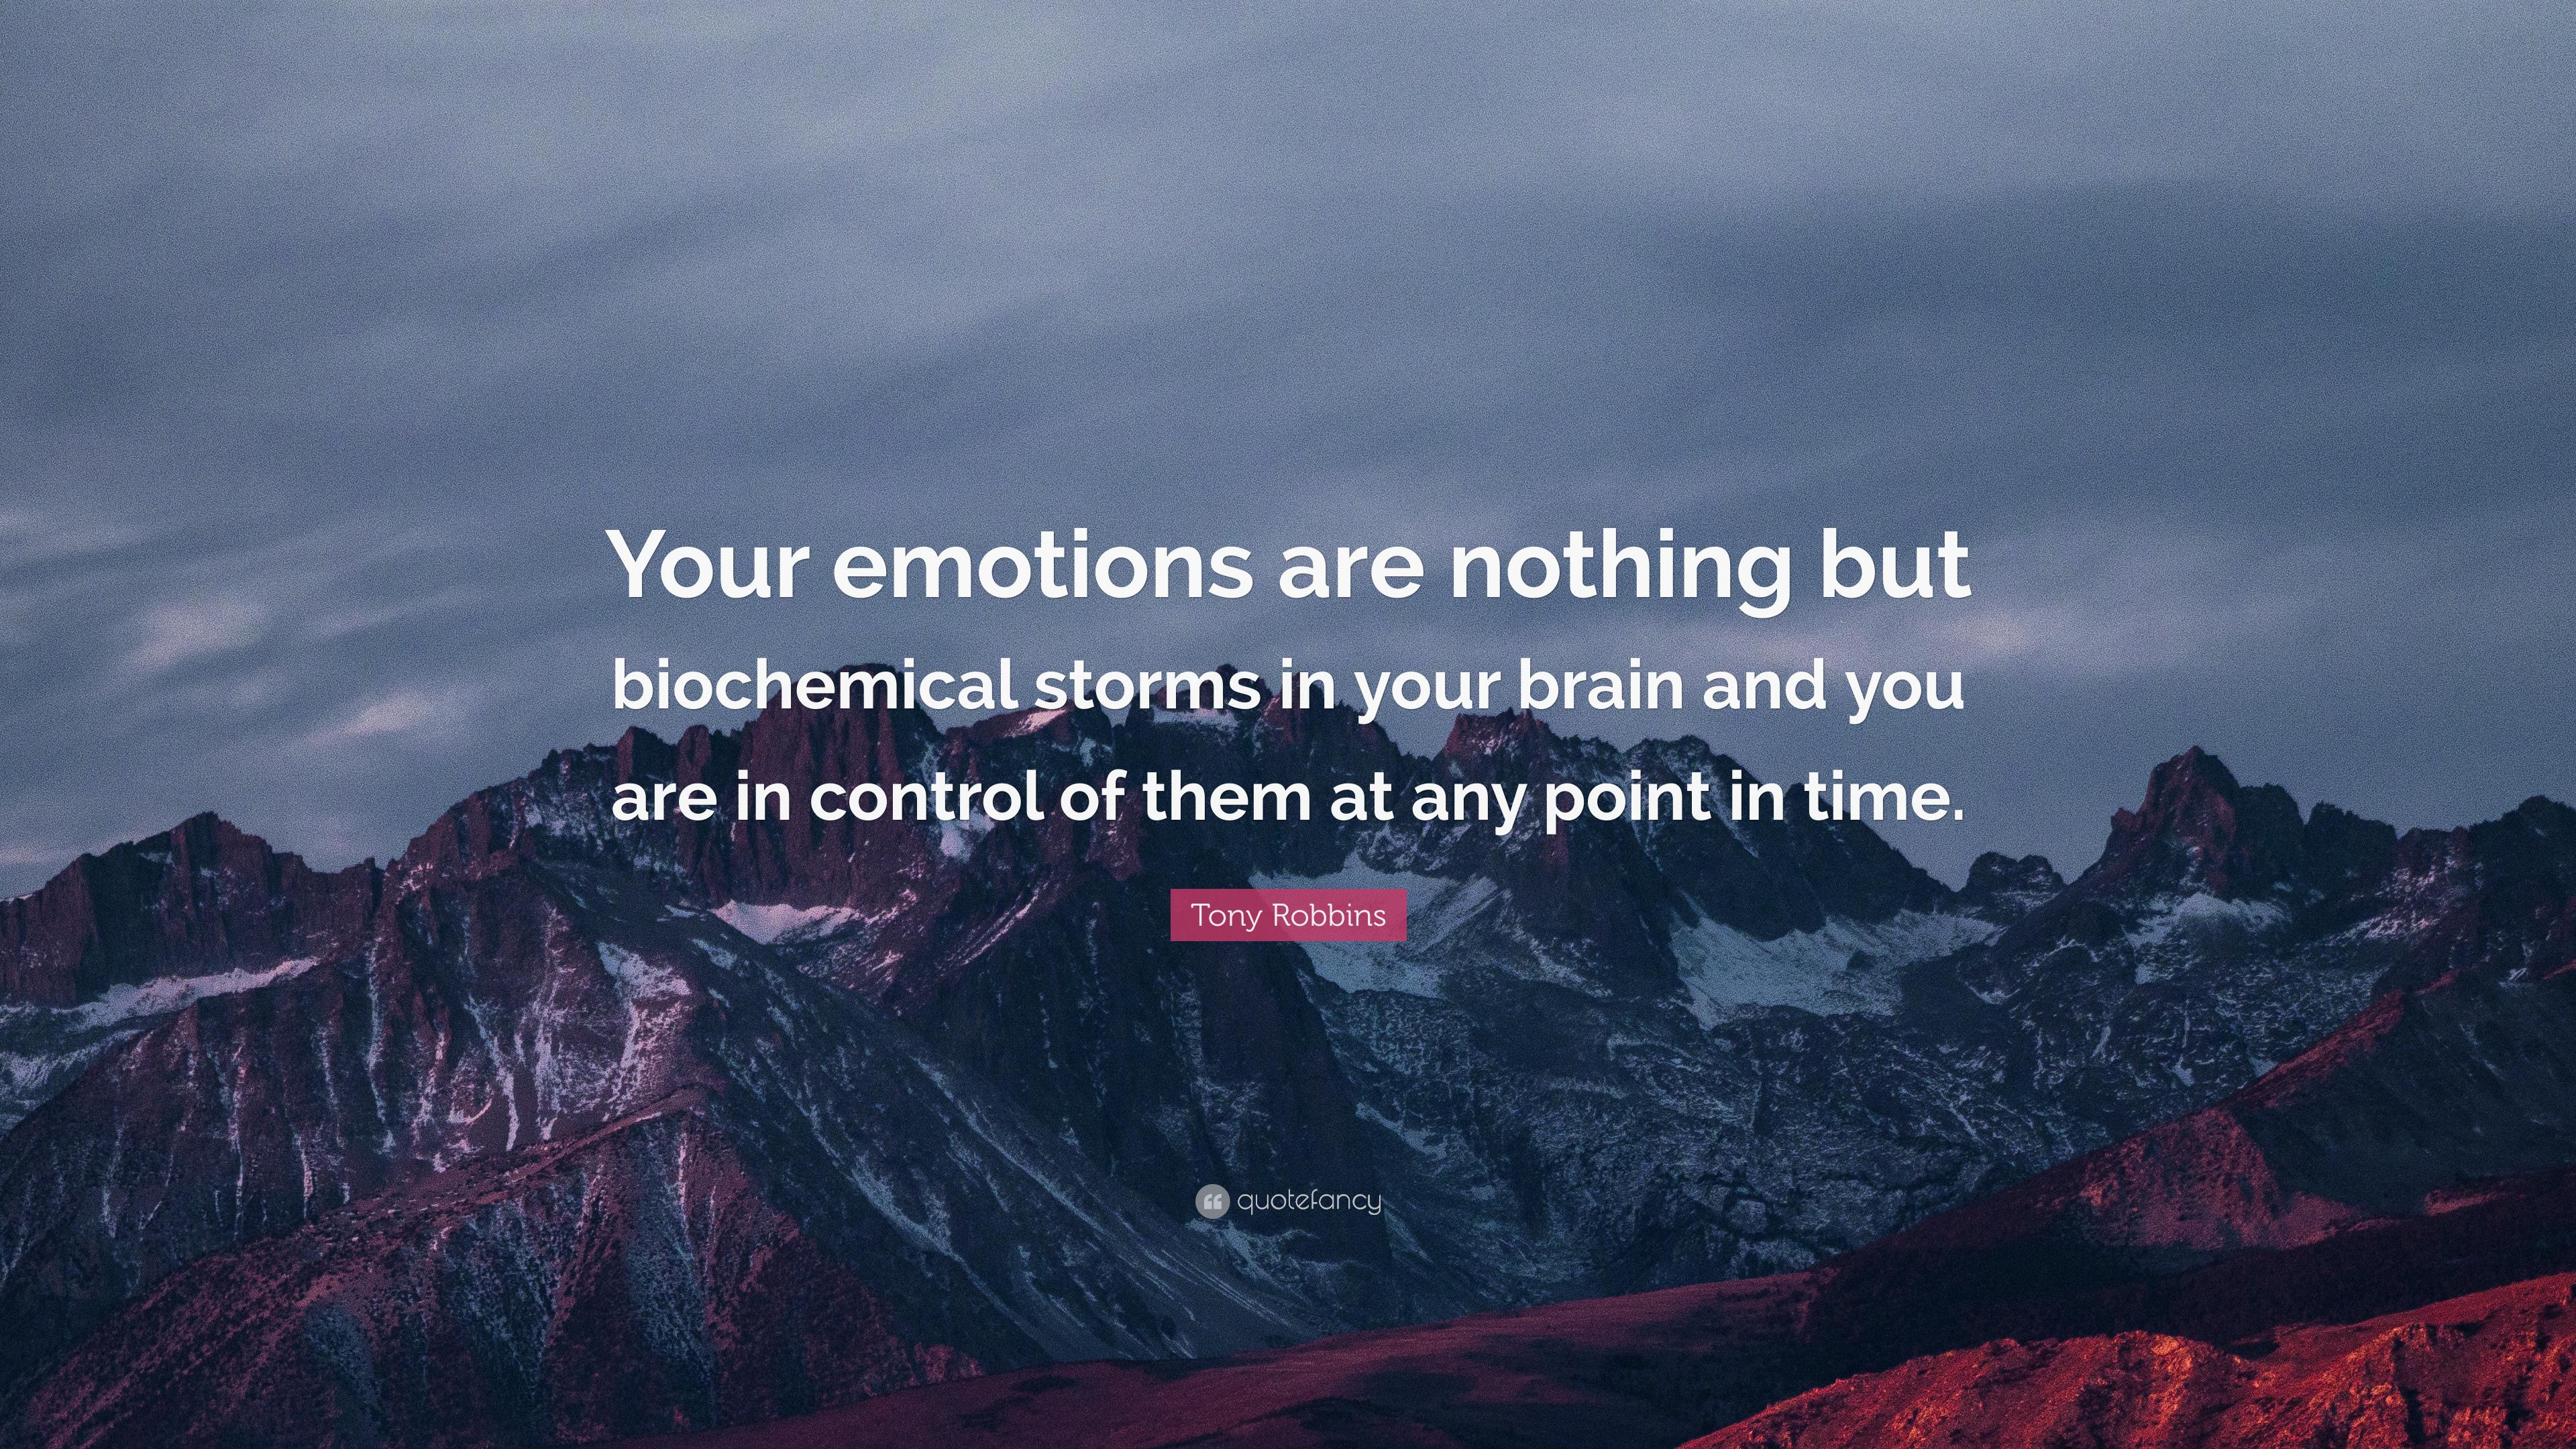 Tony Robbins Quote: “Your emotions are nothing but